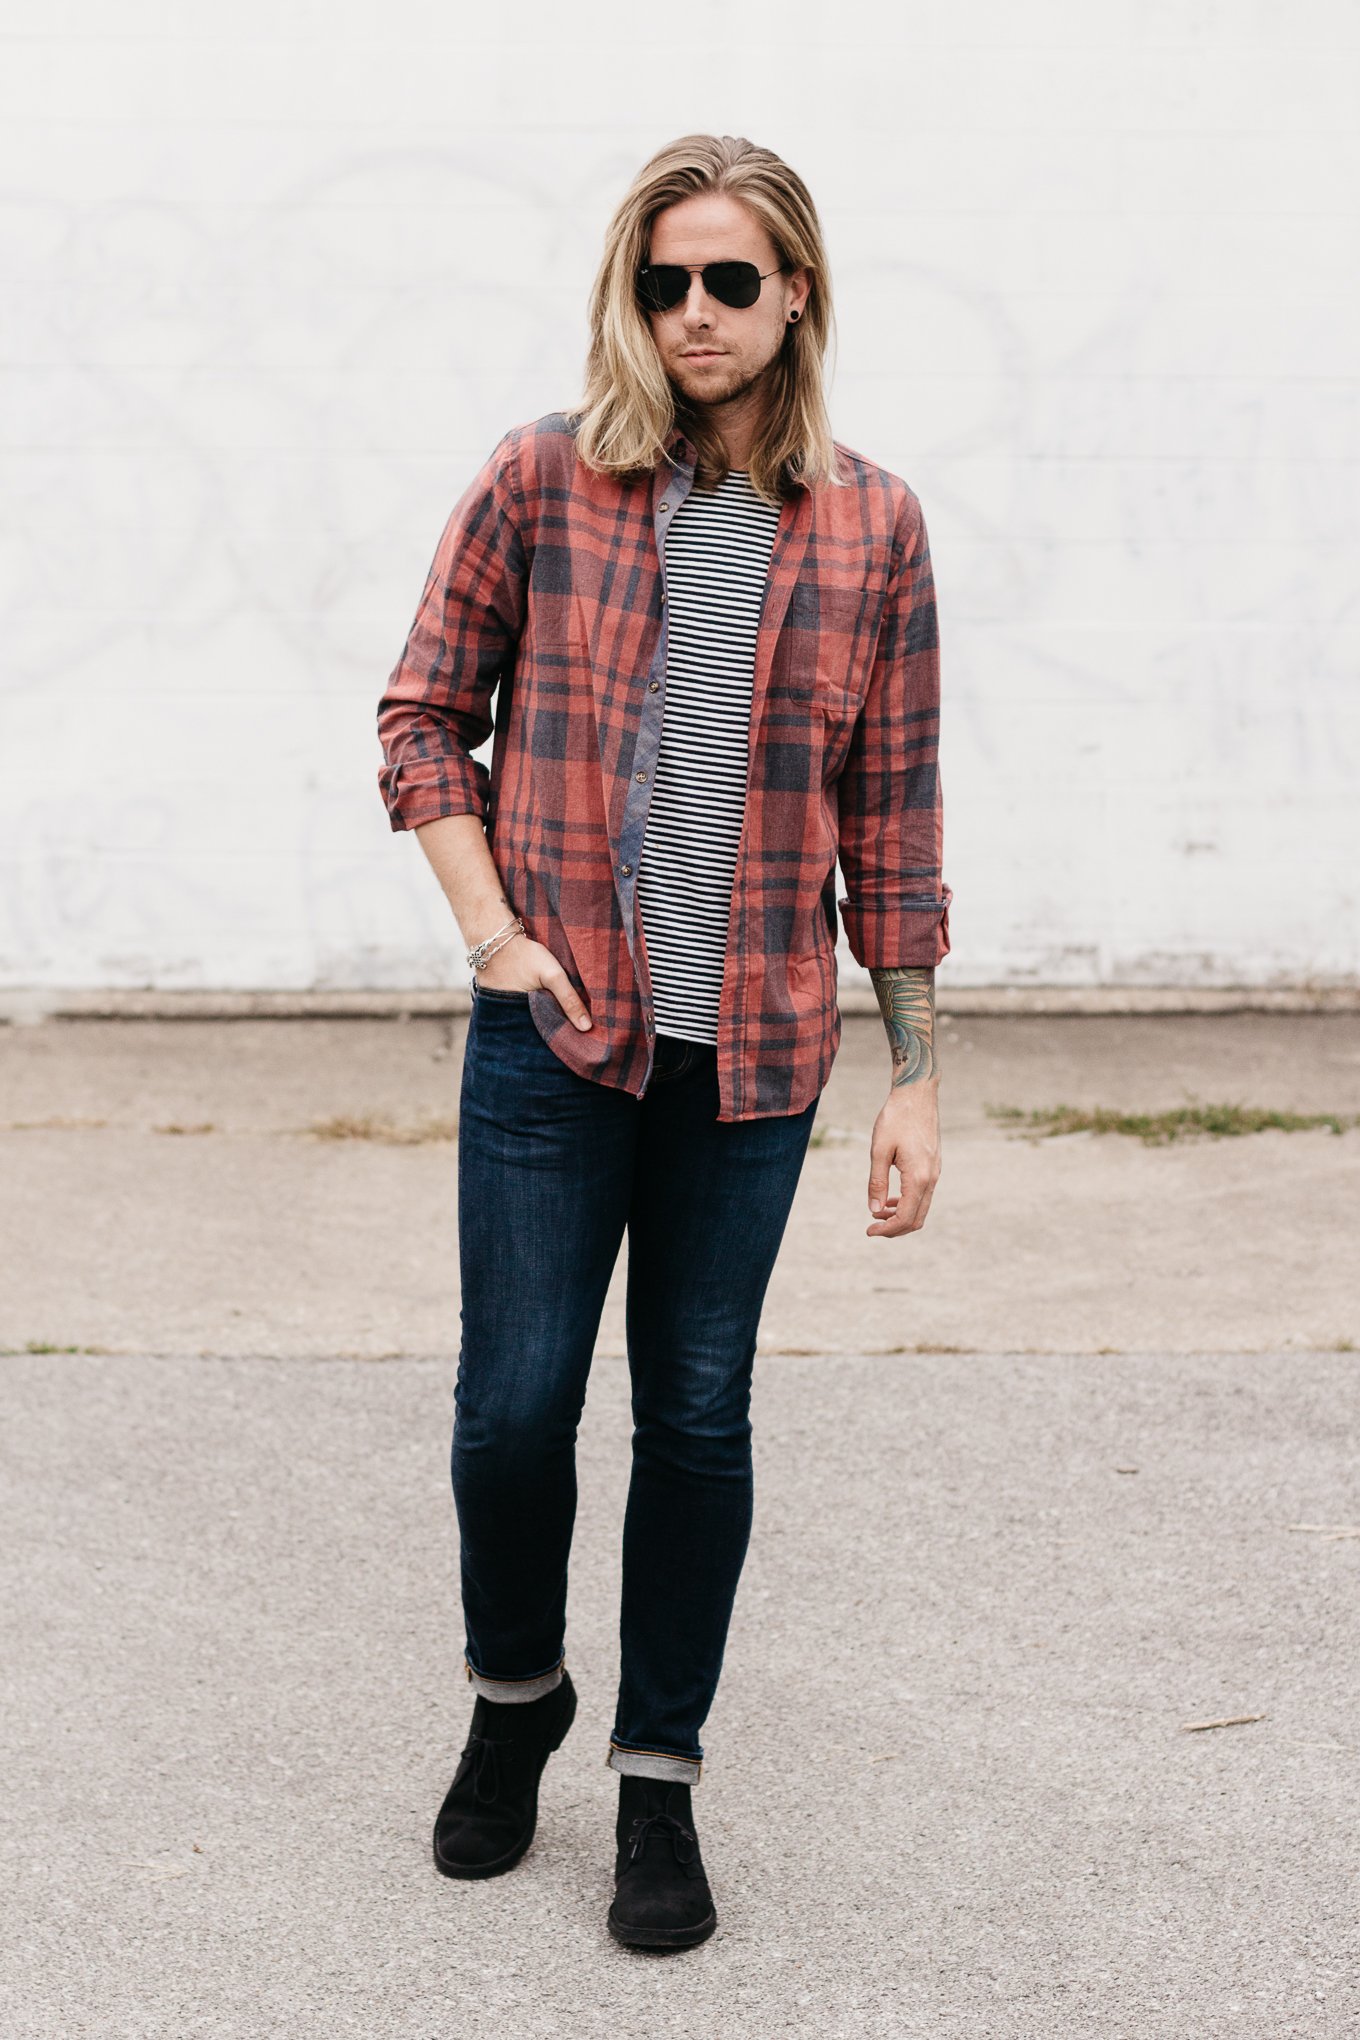 living proof hair care, big star denim, five four clothing company, mens fall fashion, how to wear stripes and plaid